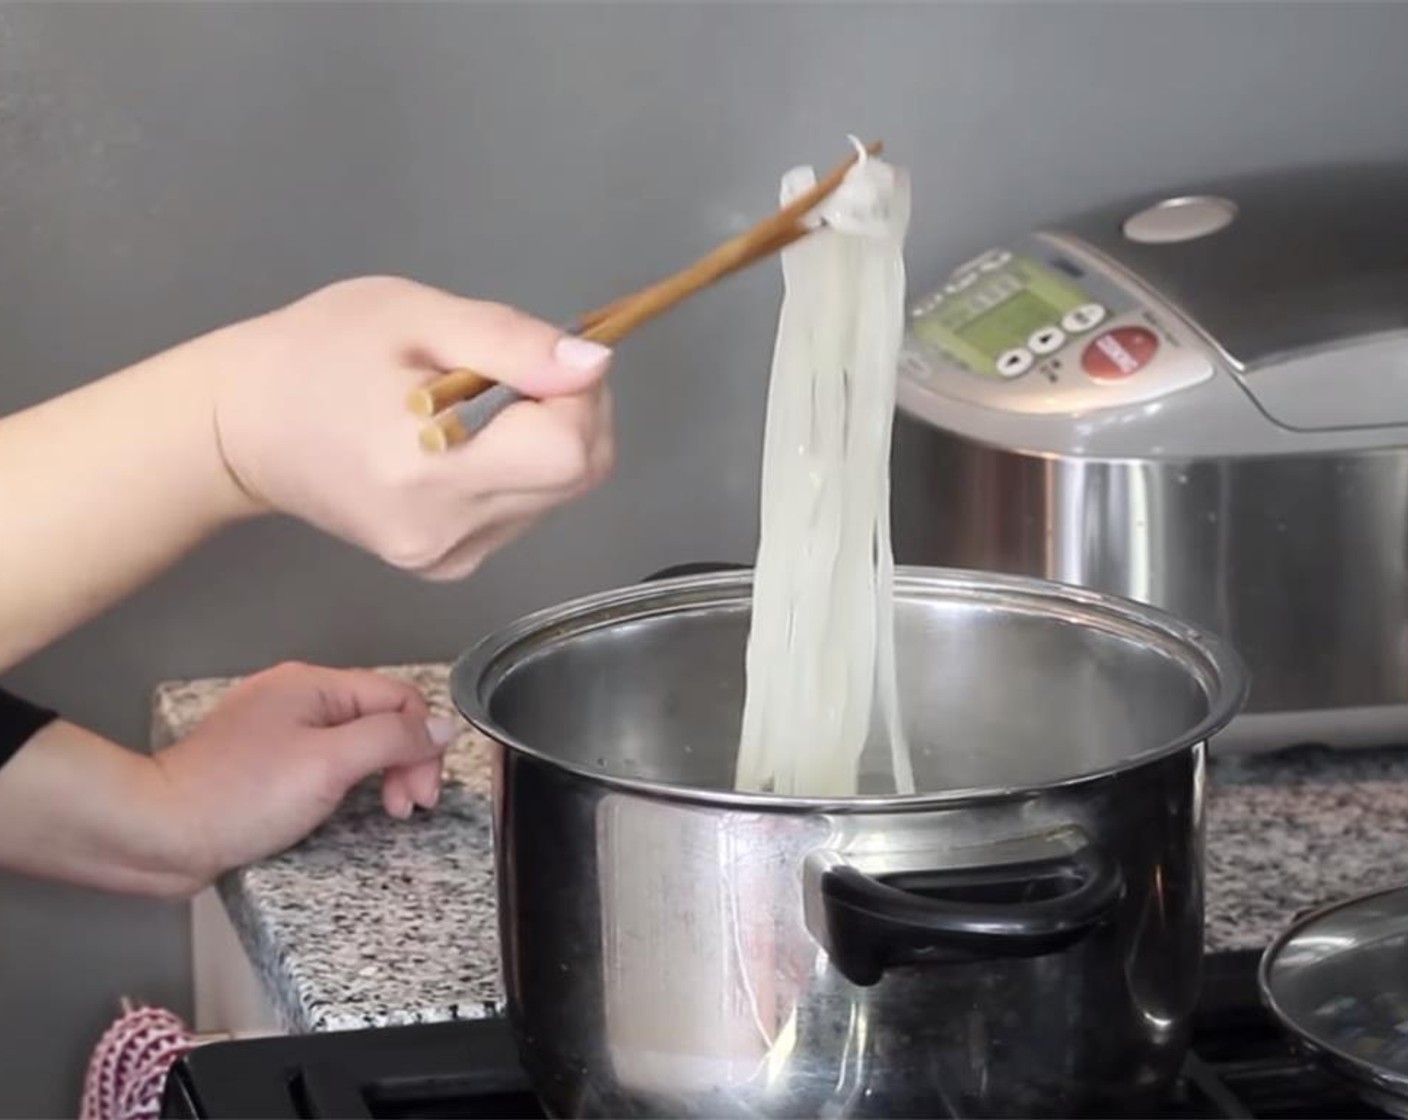 step 1 Boil your Flat Rice Noodles (4 oz) until pliable and mostly cooked, but not mushy. No need to soak them in advance.